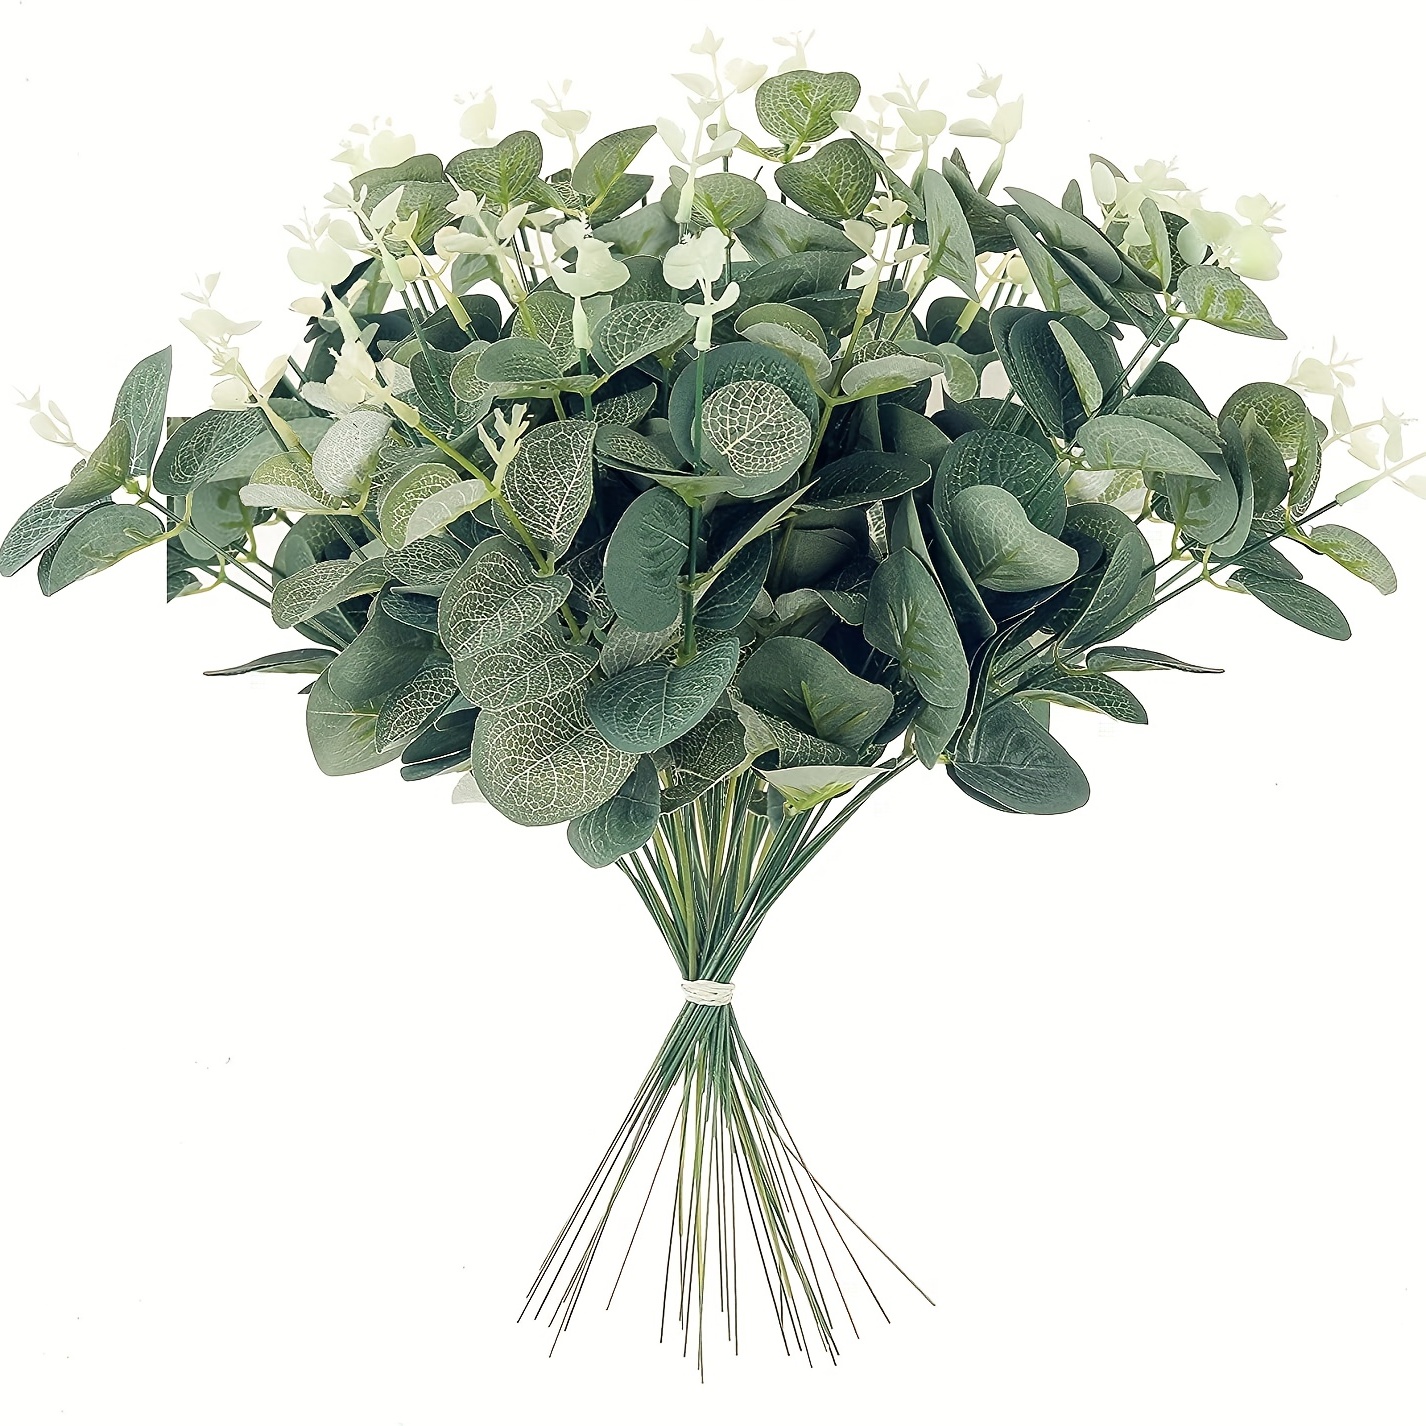 

Bouquet of 24 artificial eucalyptus branches for decorating weddings, floral wreaths, rustic parties, and home decor. Silver dollar eucalyptus leaves for a touch of elegance.